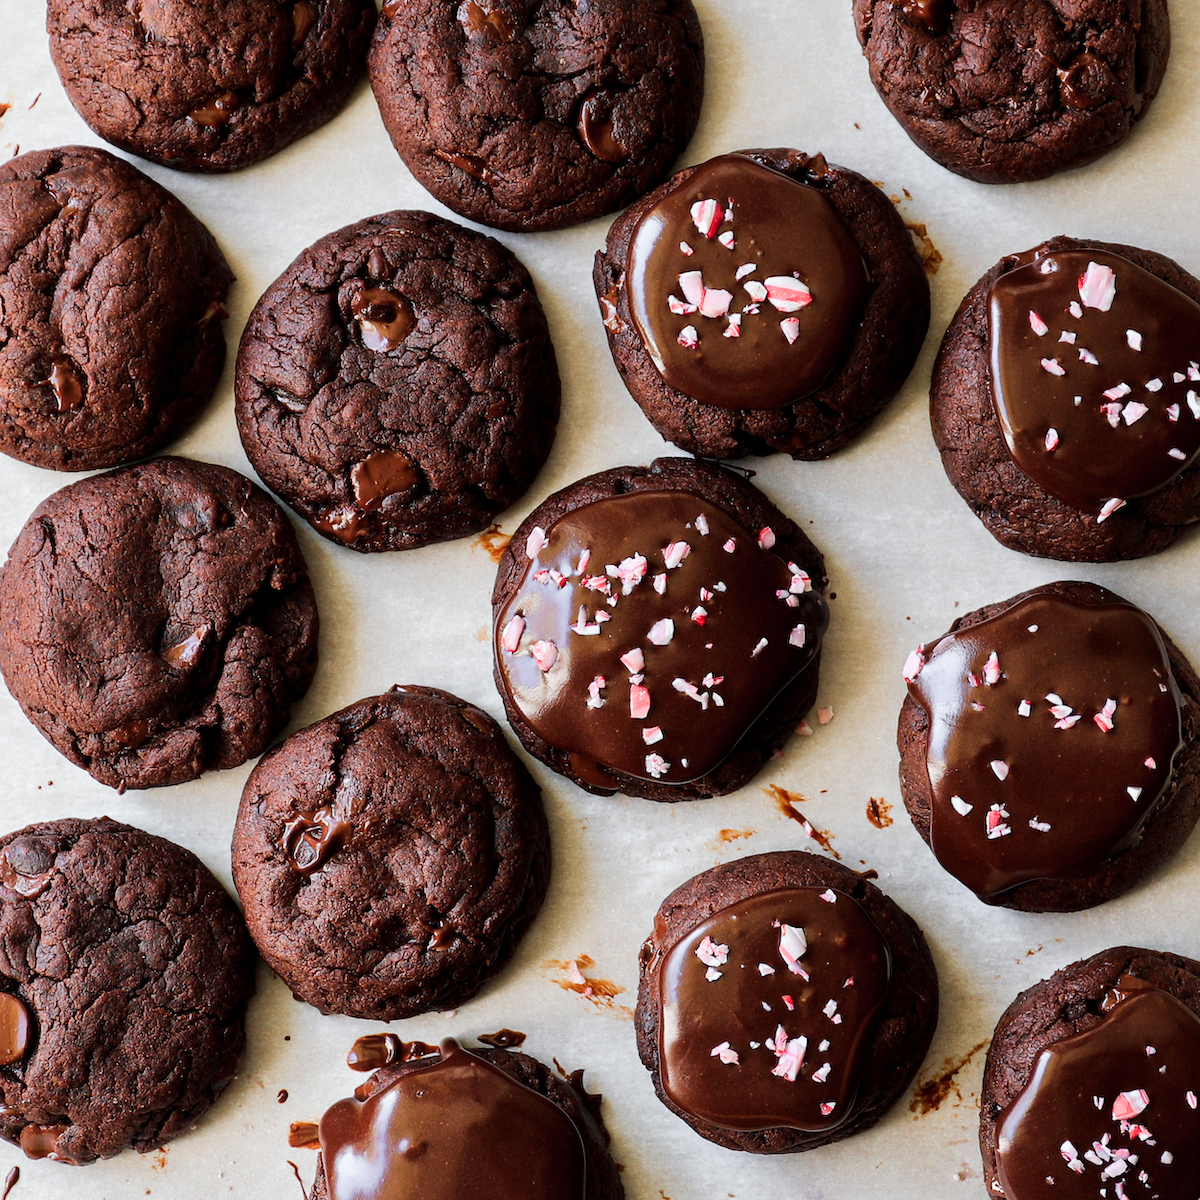 A bunch of chocolate cookies, some with frosting and some with crushed peppermint candies.